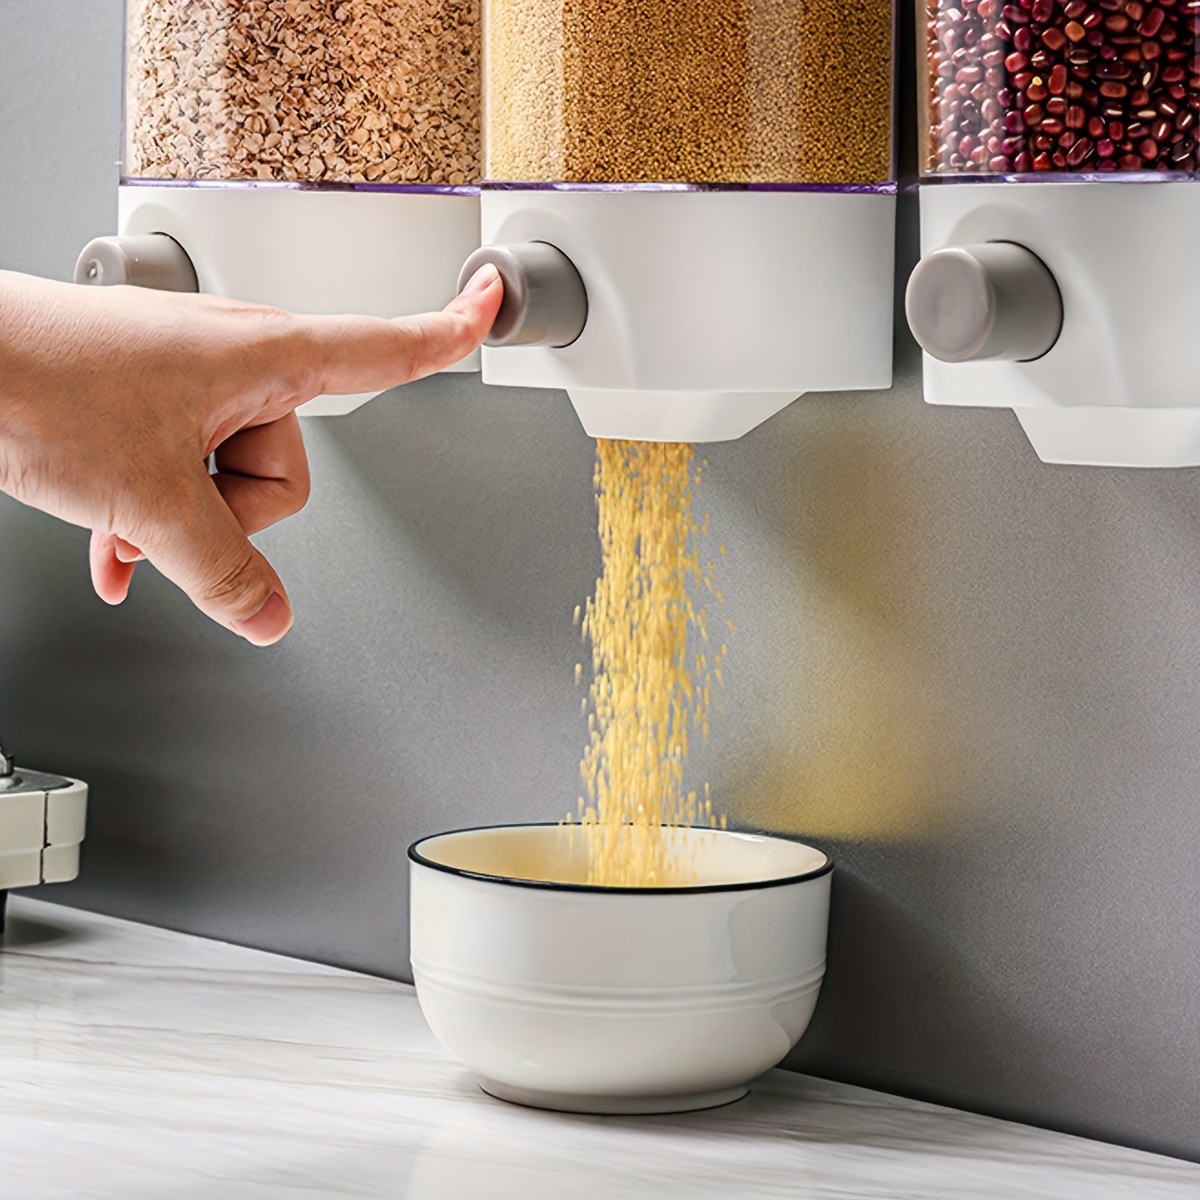 Wall-Mounted Dry Food Dispenser Kitchen Rice Storage Container